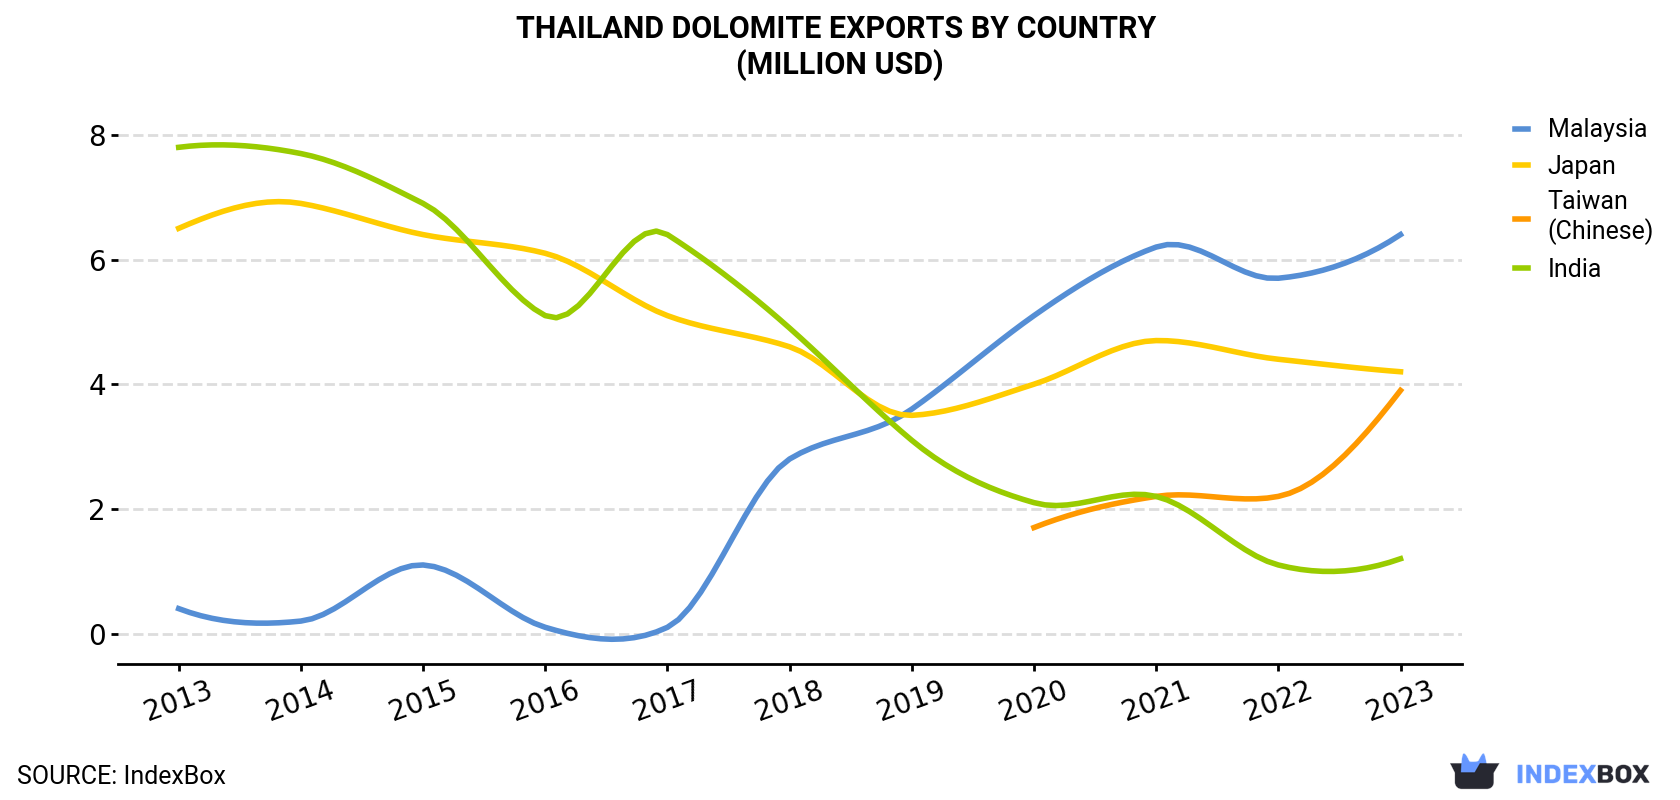 Thailand Dolomite Exports By Country (Million USD)